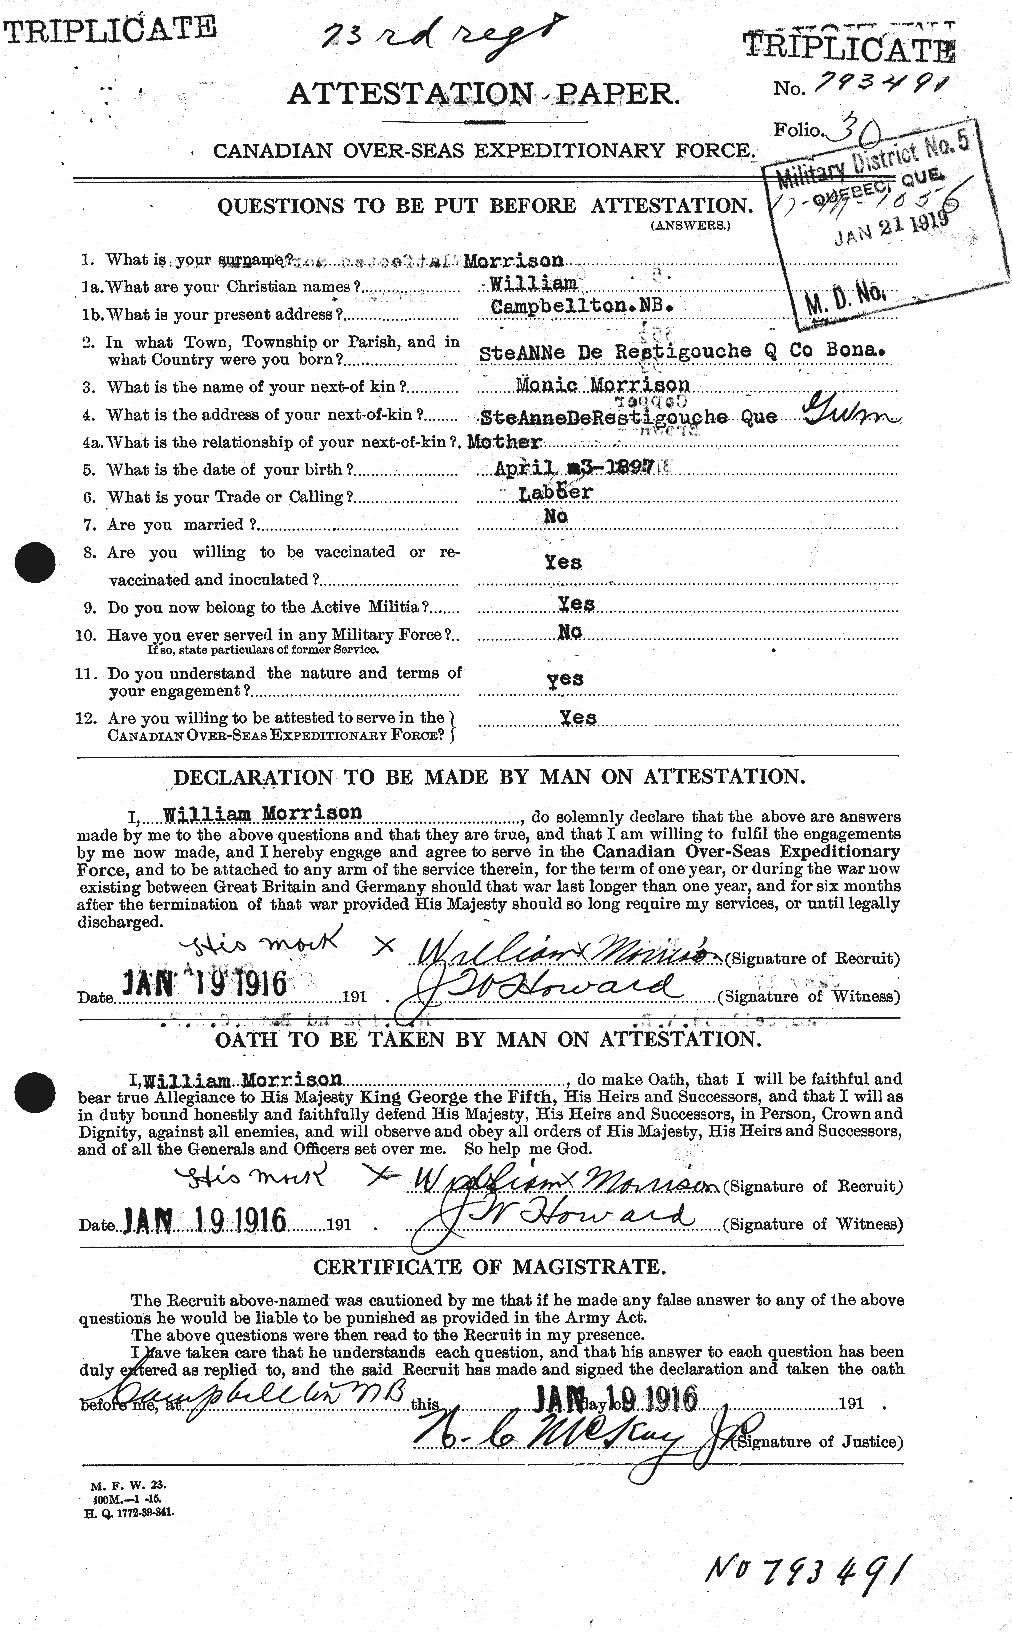 Personnel Records of the First World War - CEF 509237a